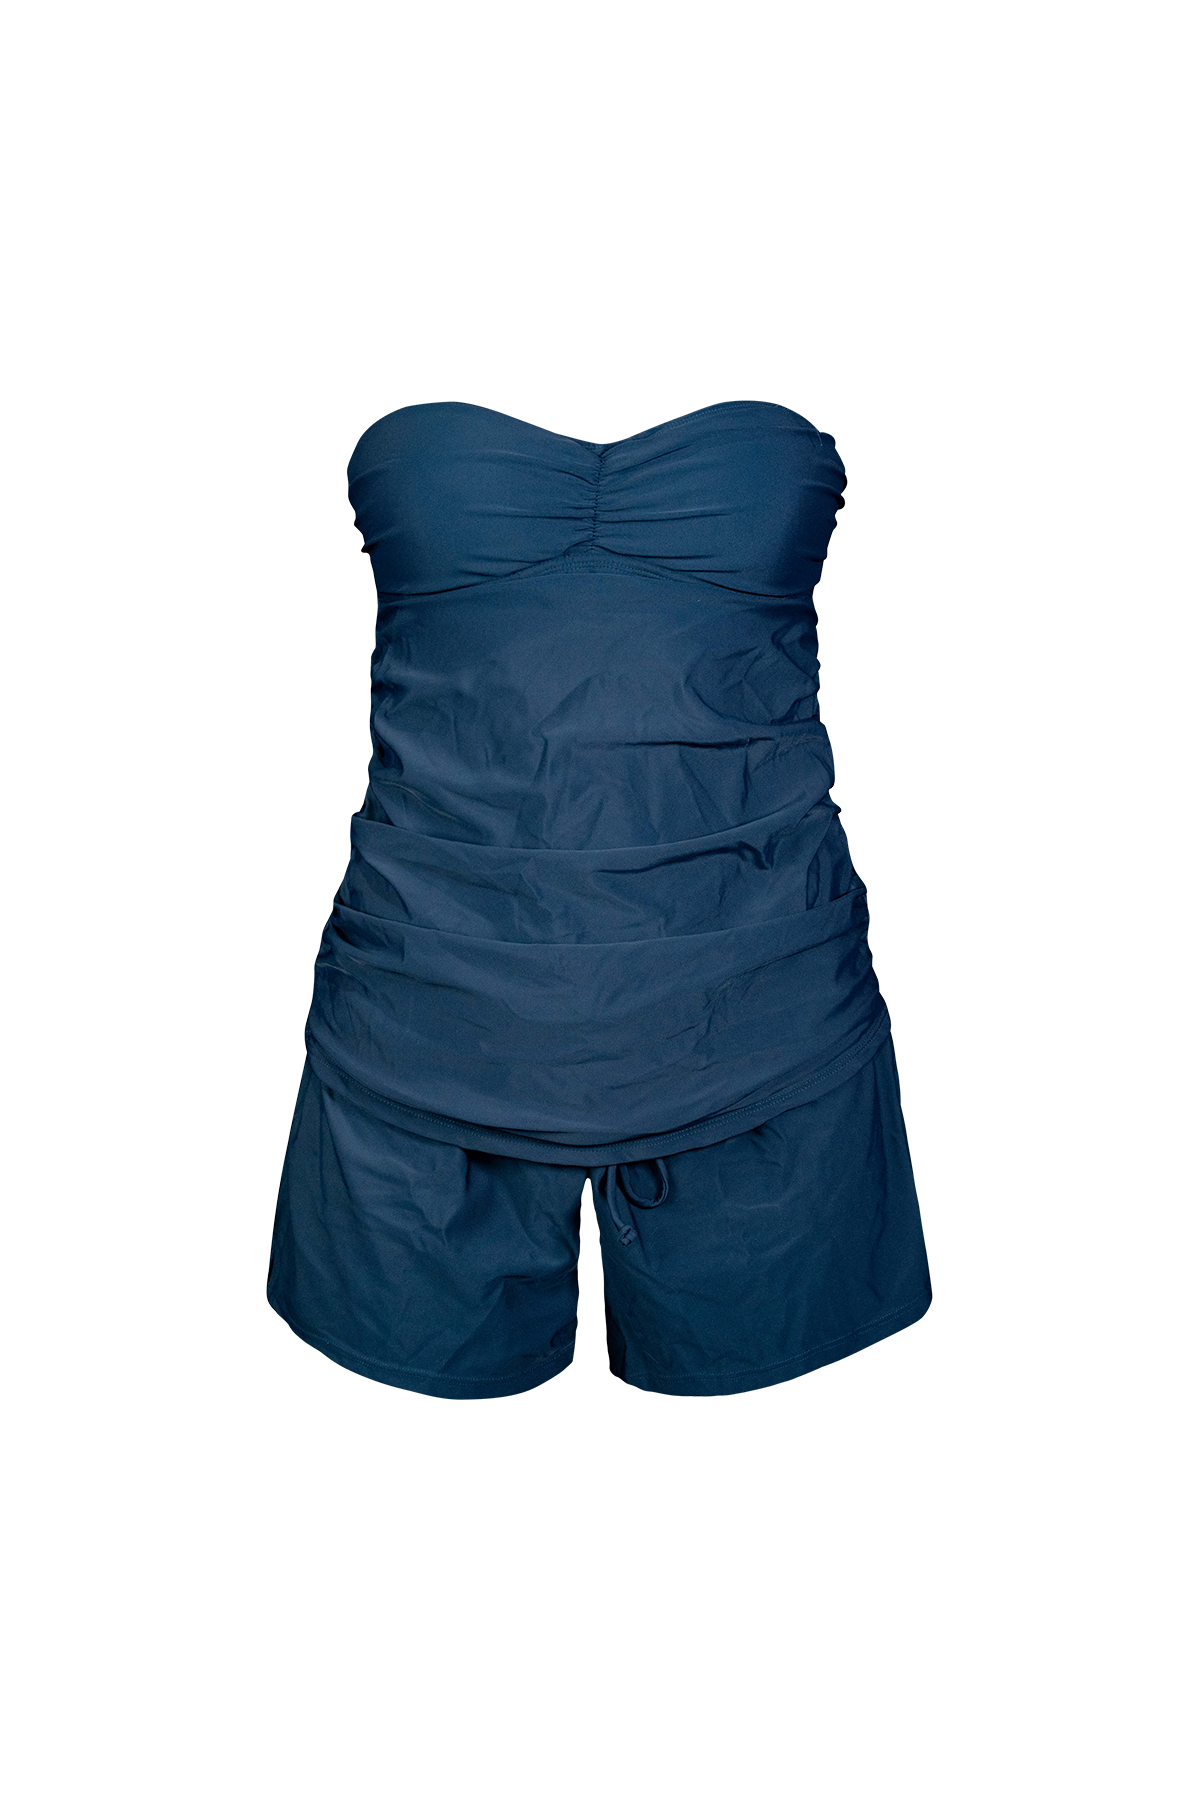 Navy Ruched Tankini